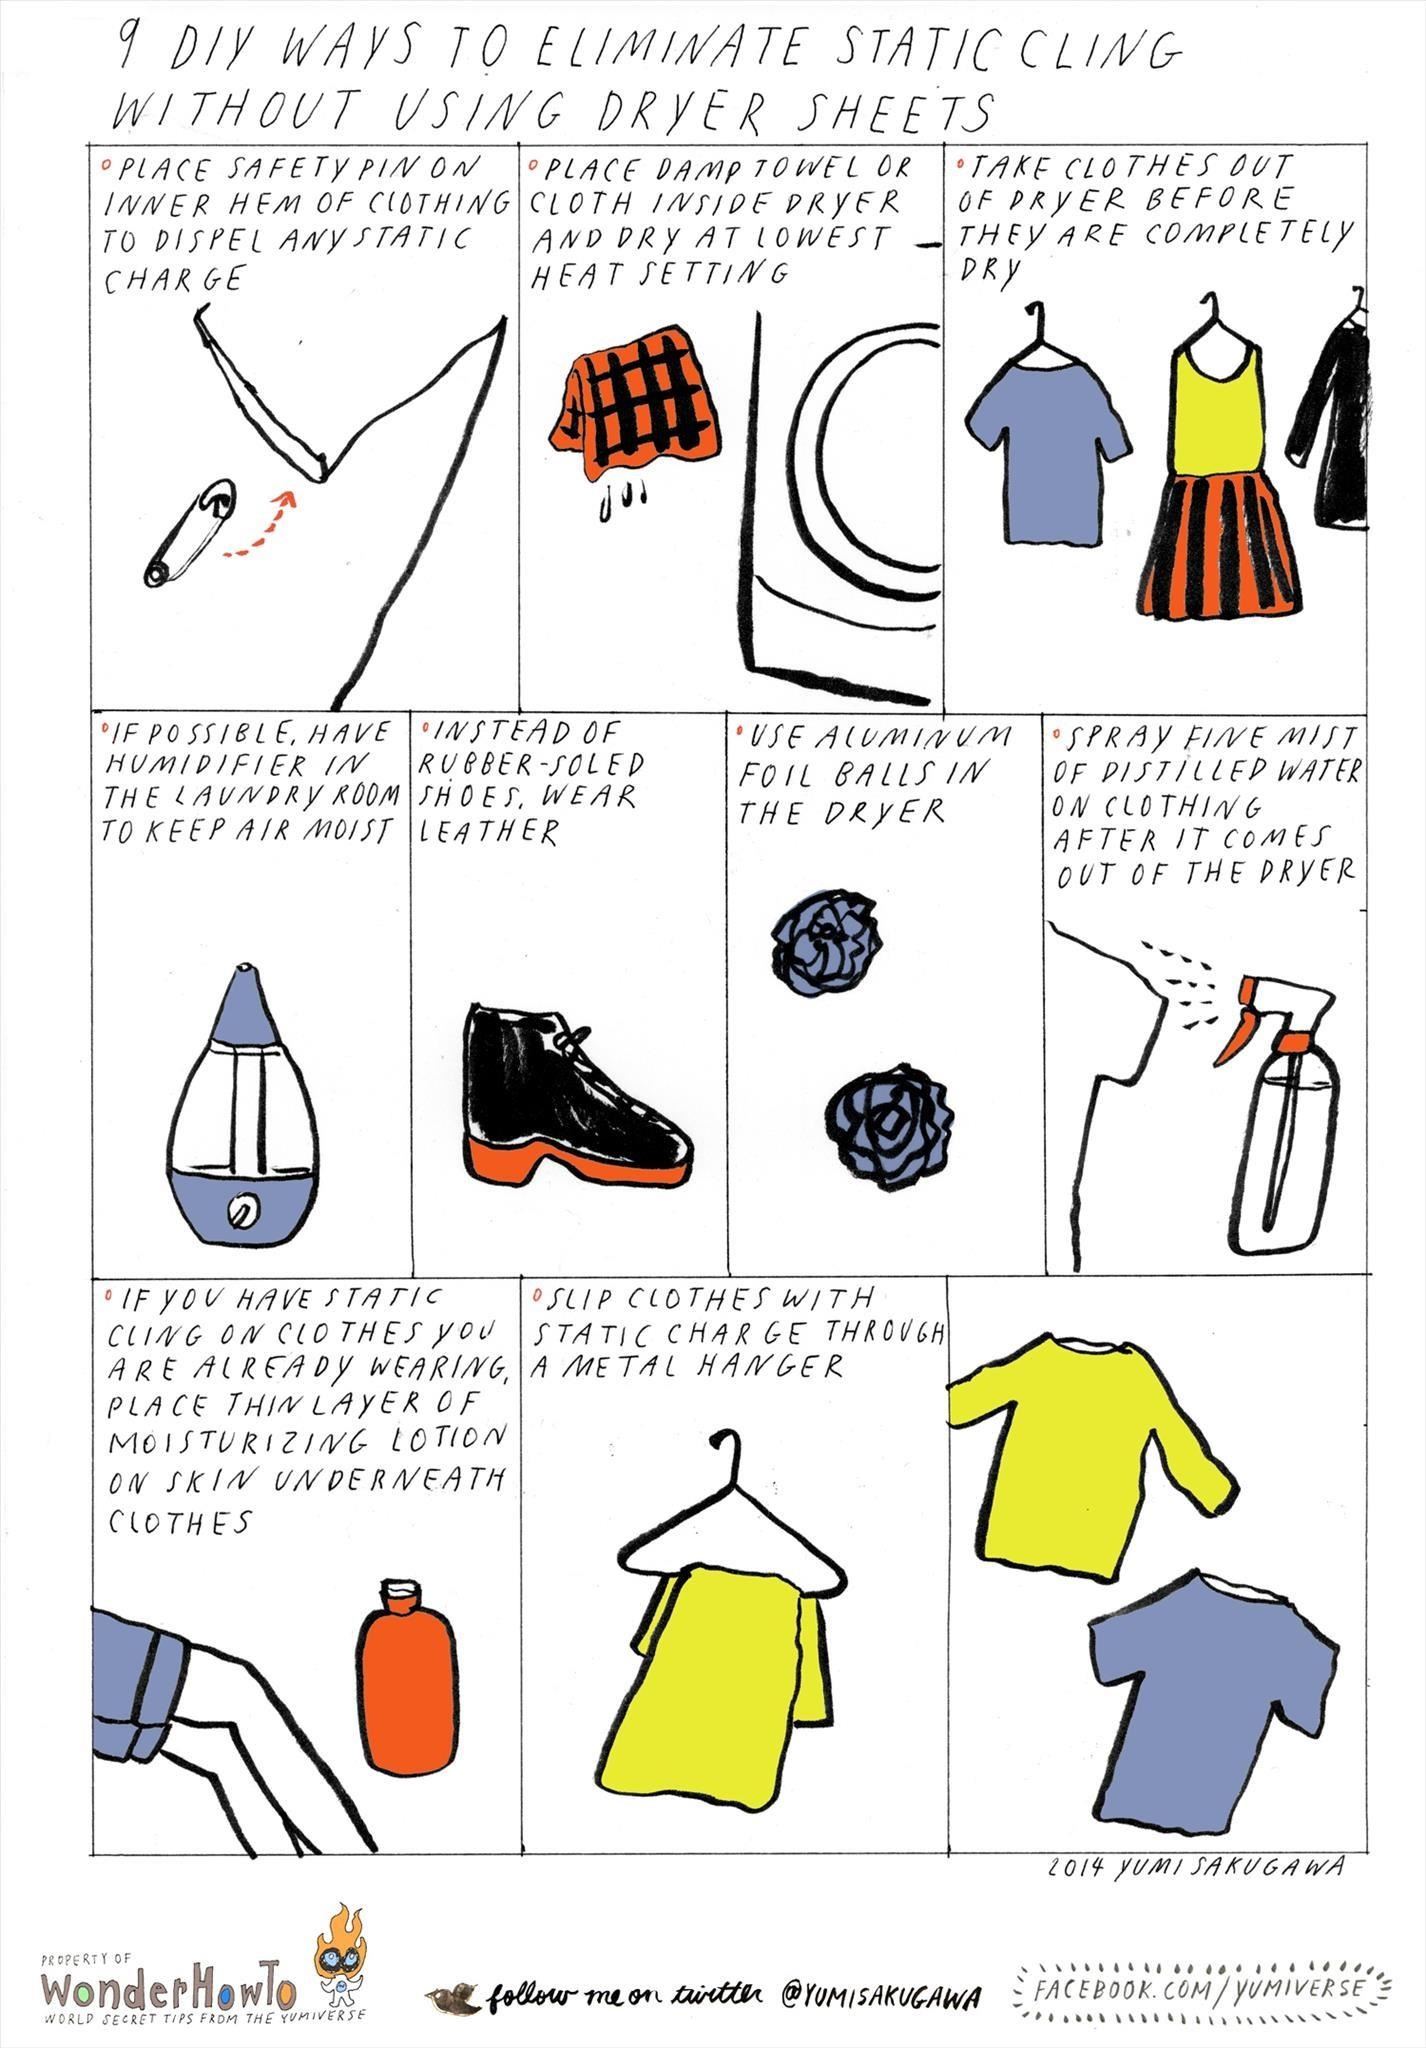 9 DIY Ways to Eliminate Static Cling Without Using Dryer ...